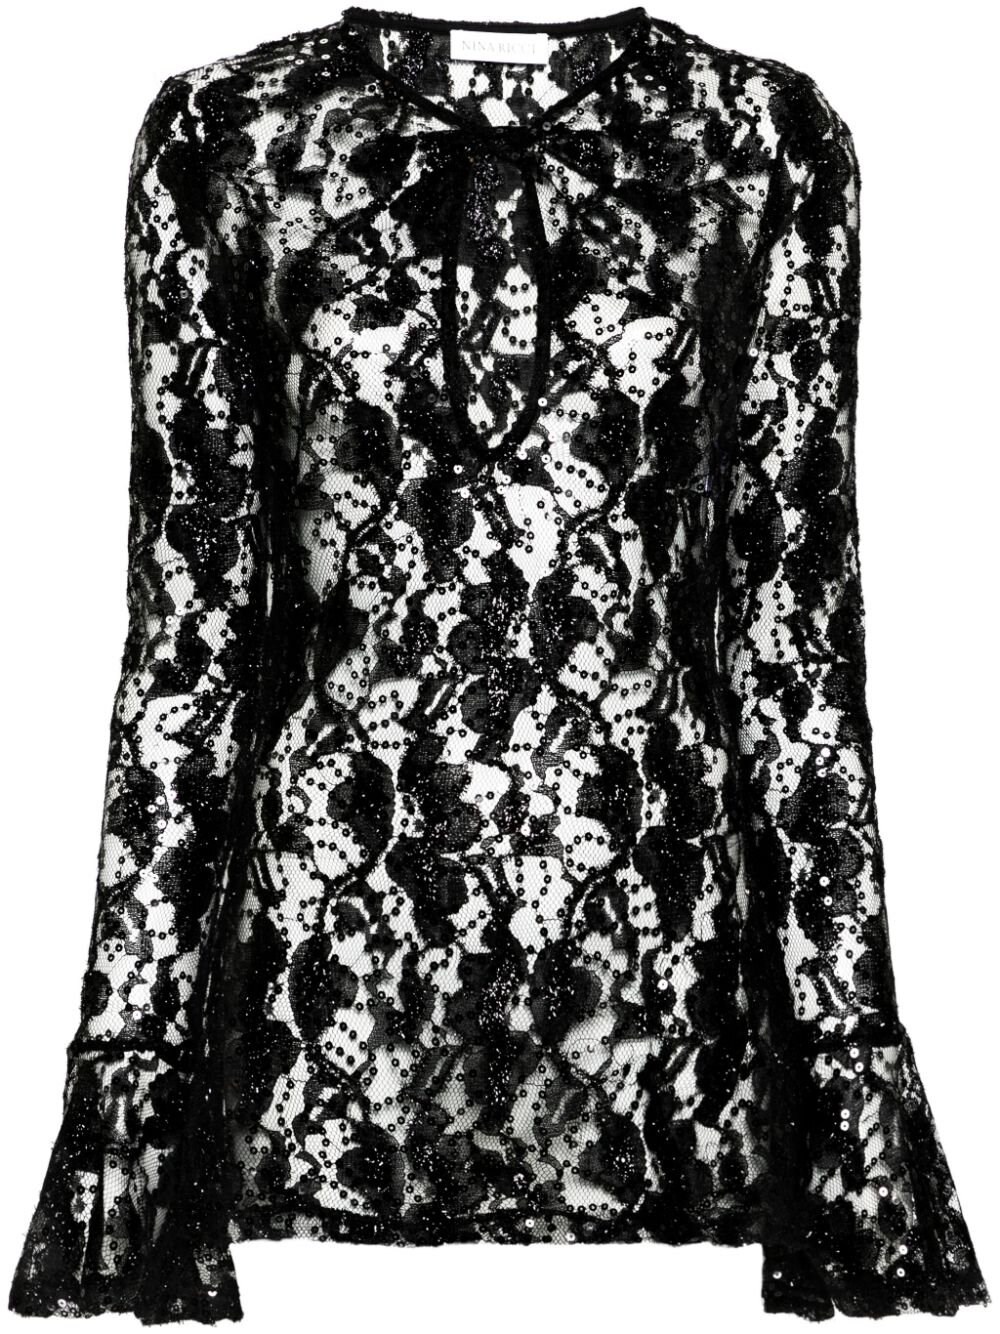 Nina Ricci Womens Black Sequin-embellished Bell-sleeve Lace Top